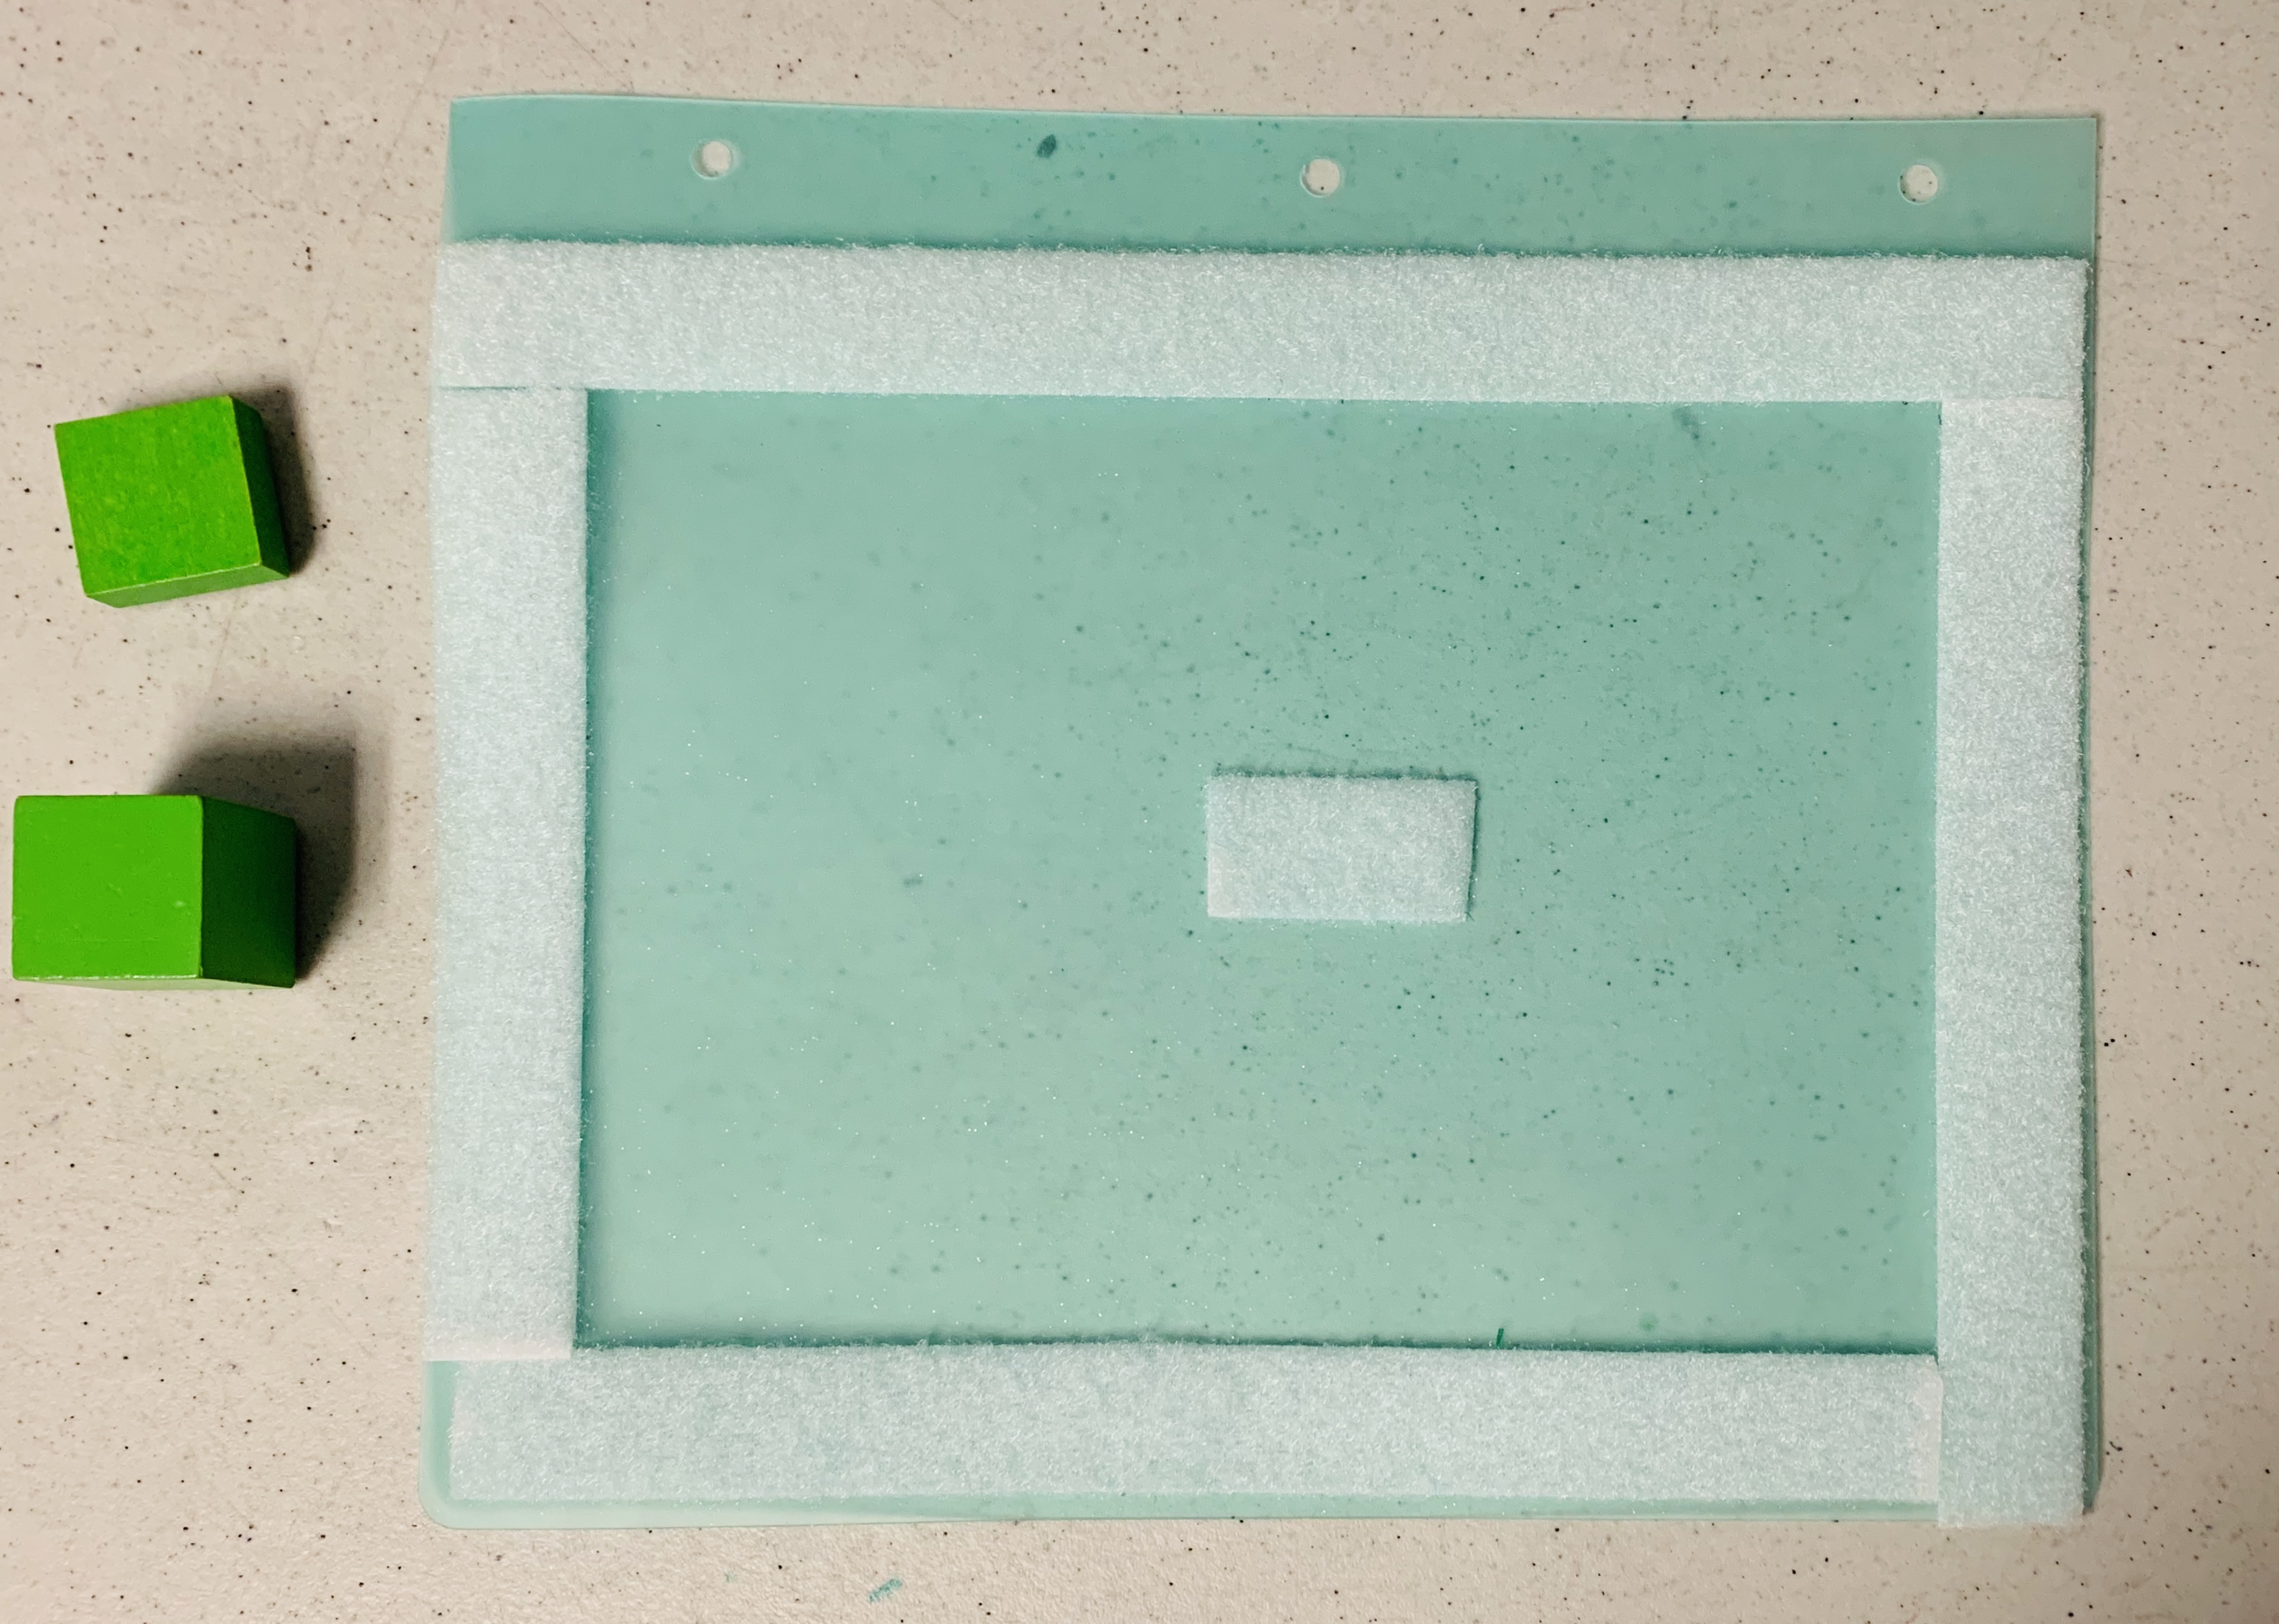 Velcro around perimeter of paper with two square wooden blocks on the left side.